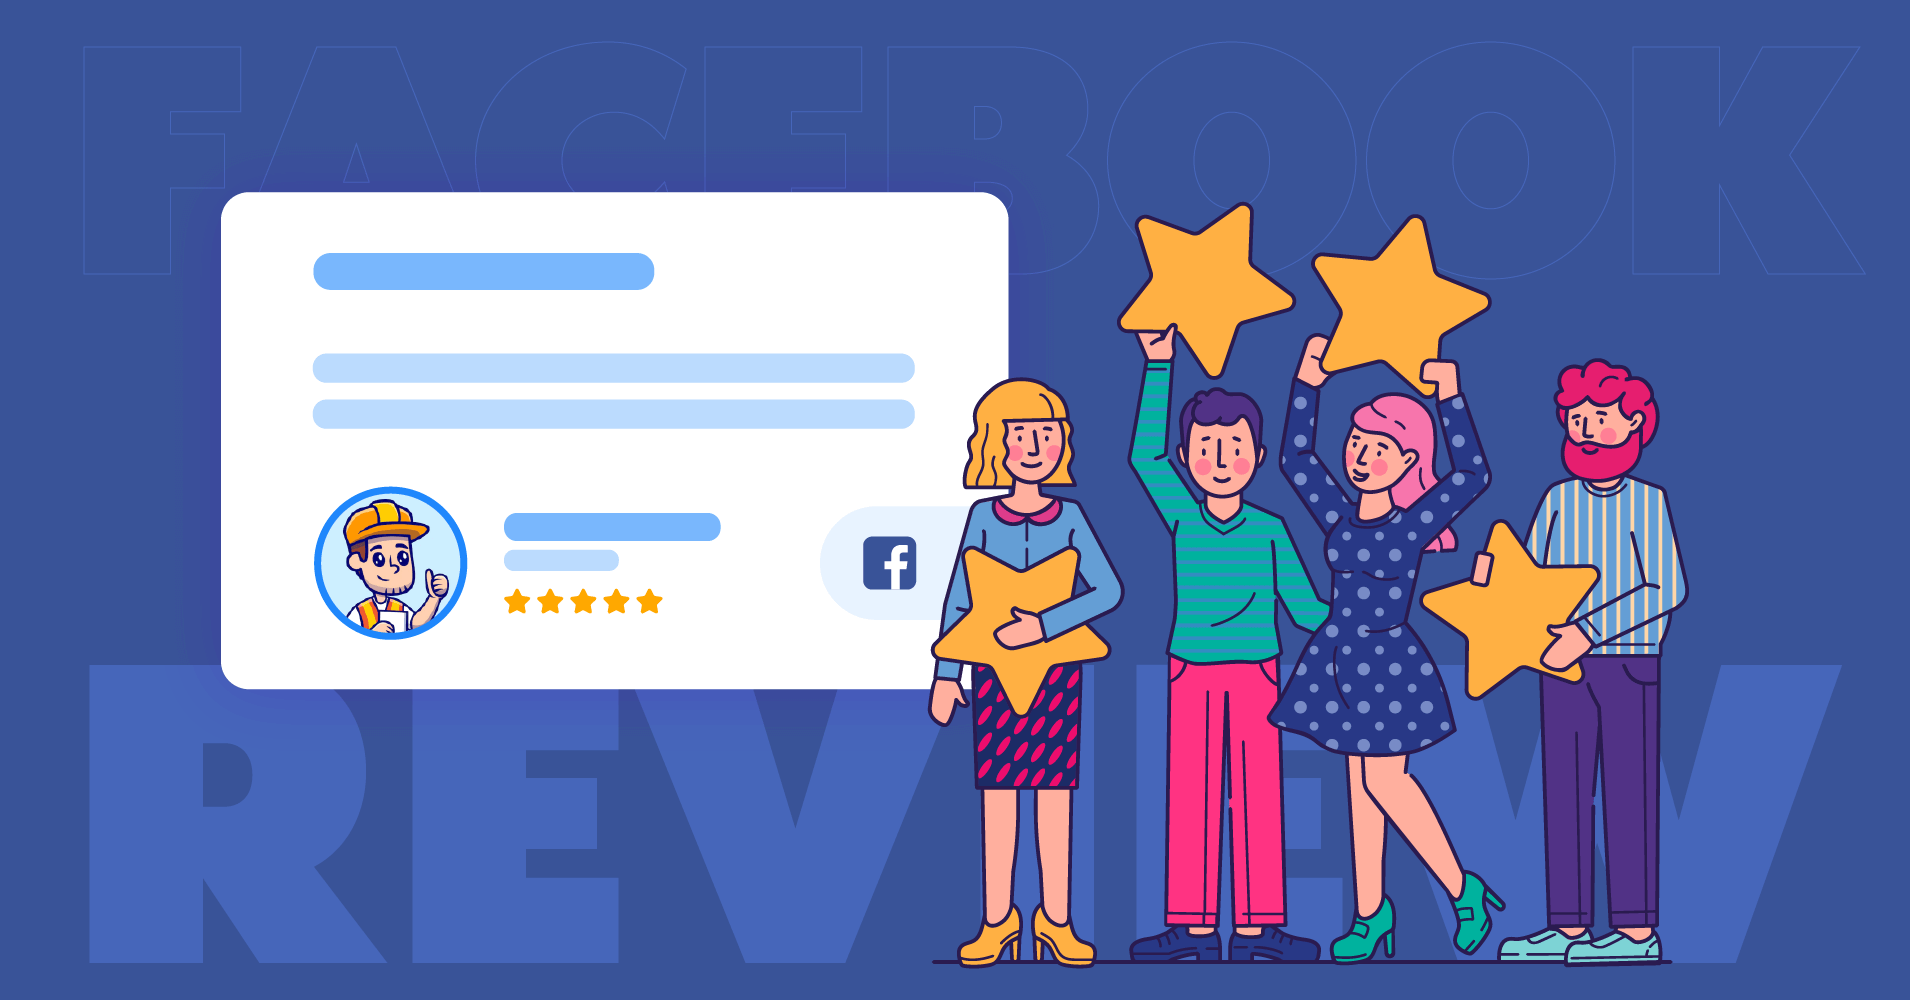 How to write a review on Facebook